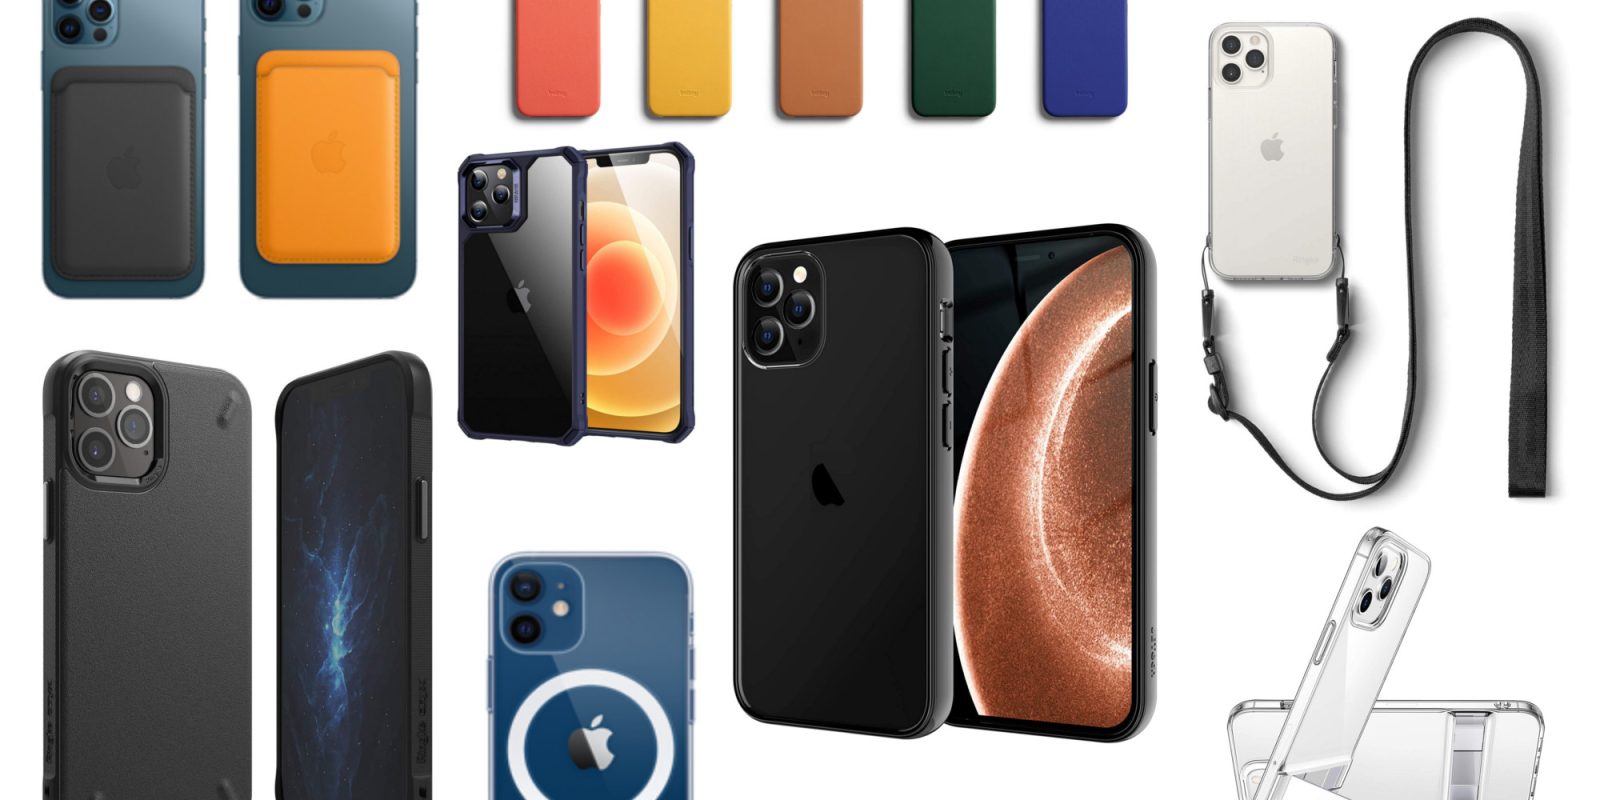 12 Best iPhone 12 Cases and Covers You Can Buy (2021)